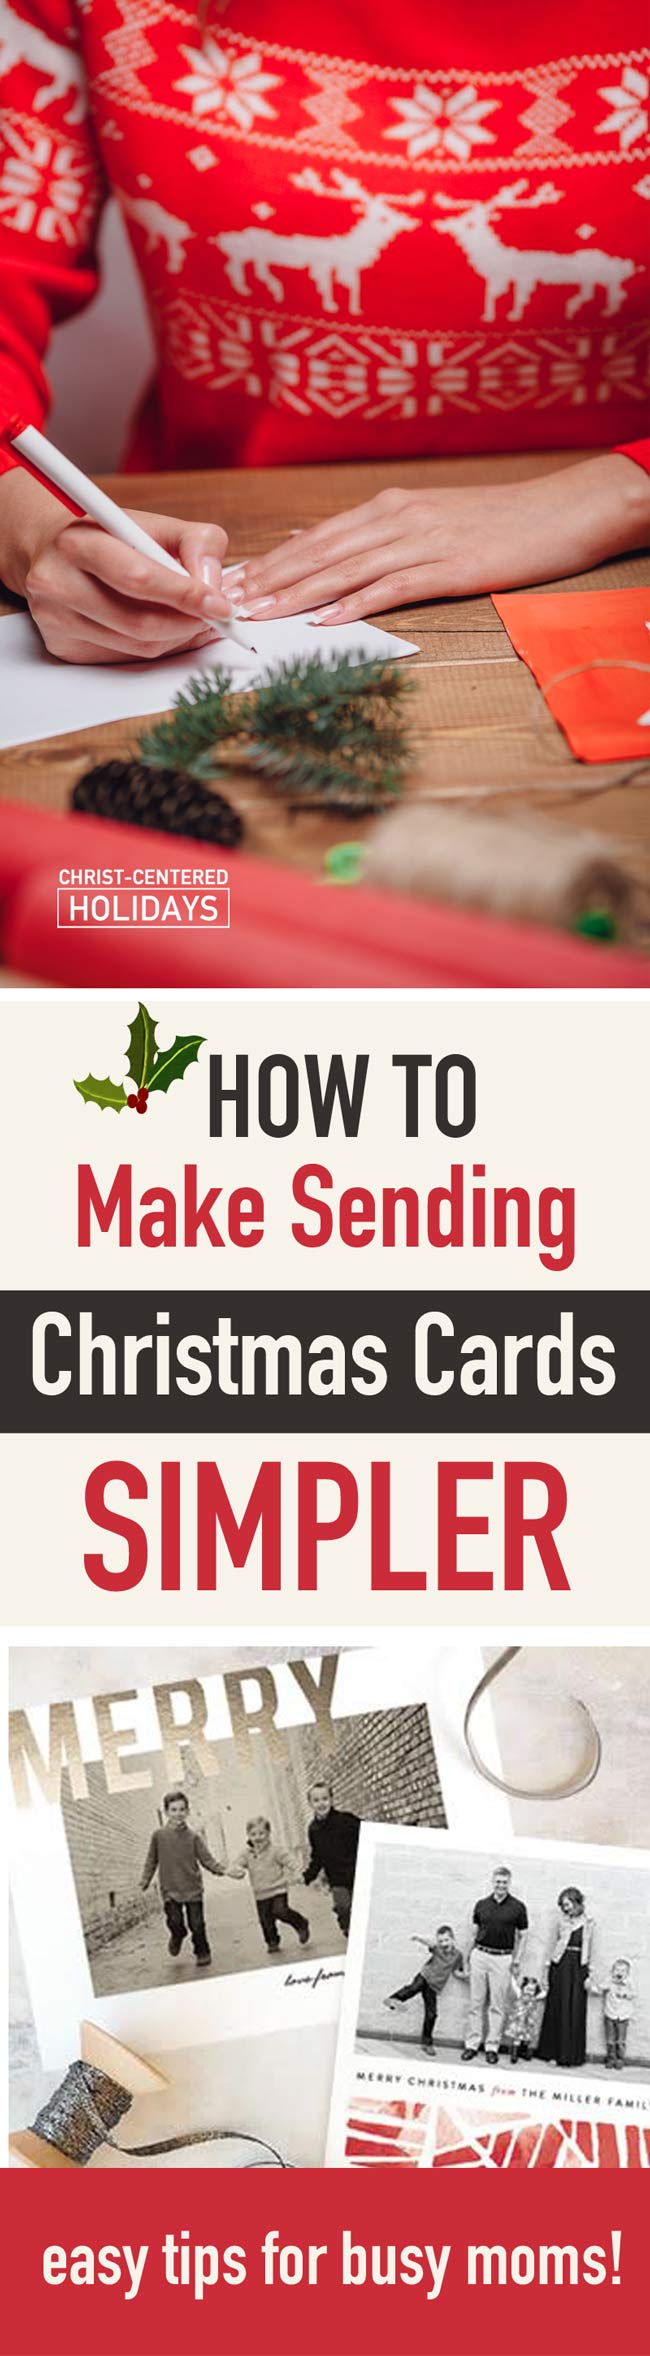 how to send christmas cards | when send christmas cards | send christmas card | send christmas cards | easy christmas cards | quick easy christmas cards | personalized christmas cards | custom christmas cards | christmas cards | picture christmas cards | photo christmas cards | create christmas card | photo christmas card